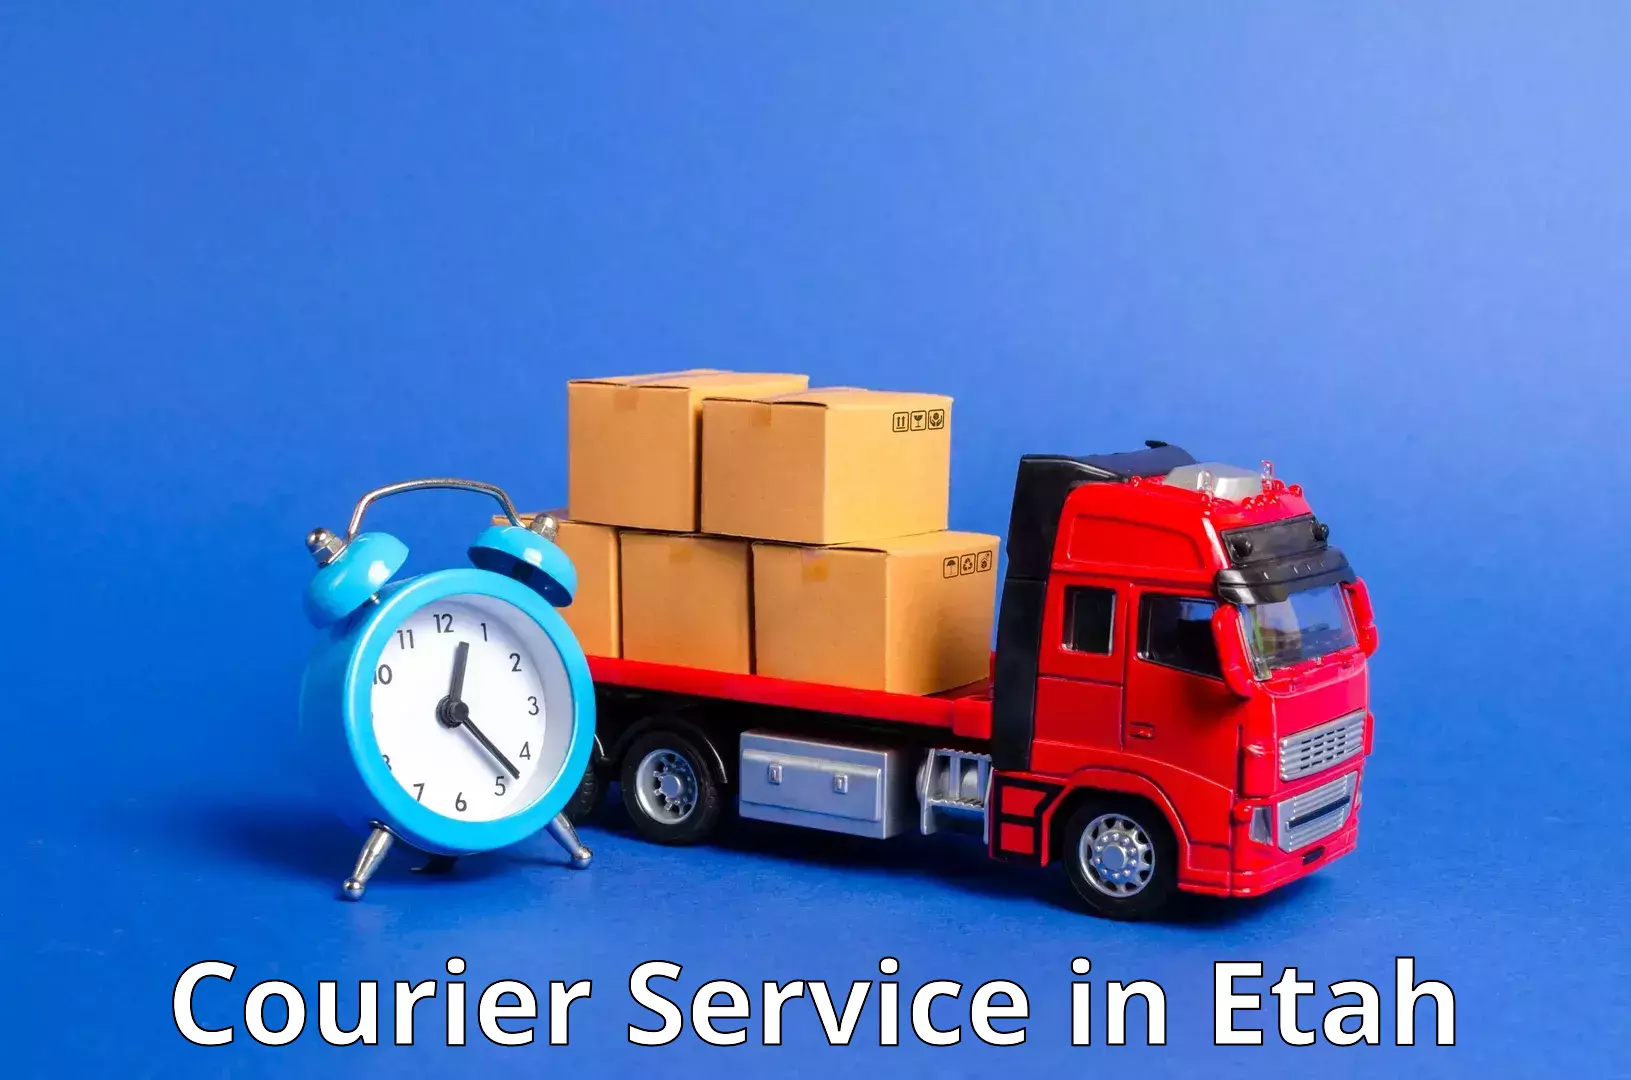 Efficient courier operations in Etah